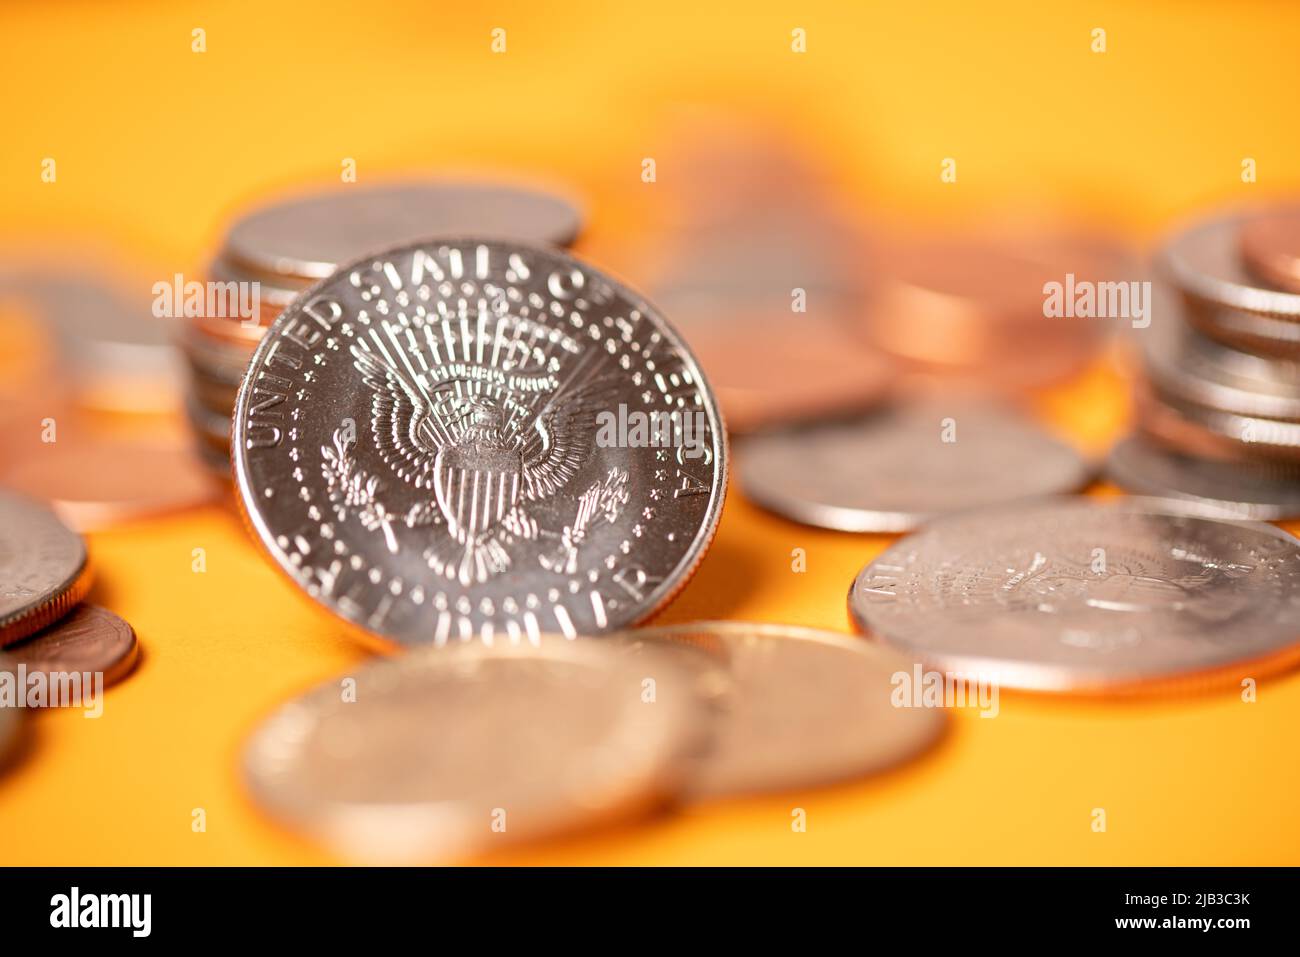 US dollar coins on orange background. Half dollar coins piled up with pennies and quarters. Dollar currency stacked and piled up Stock Photo